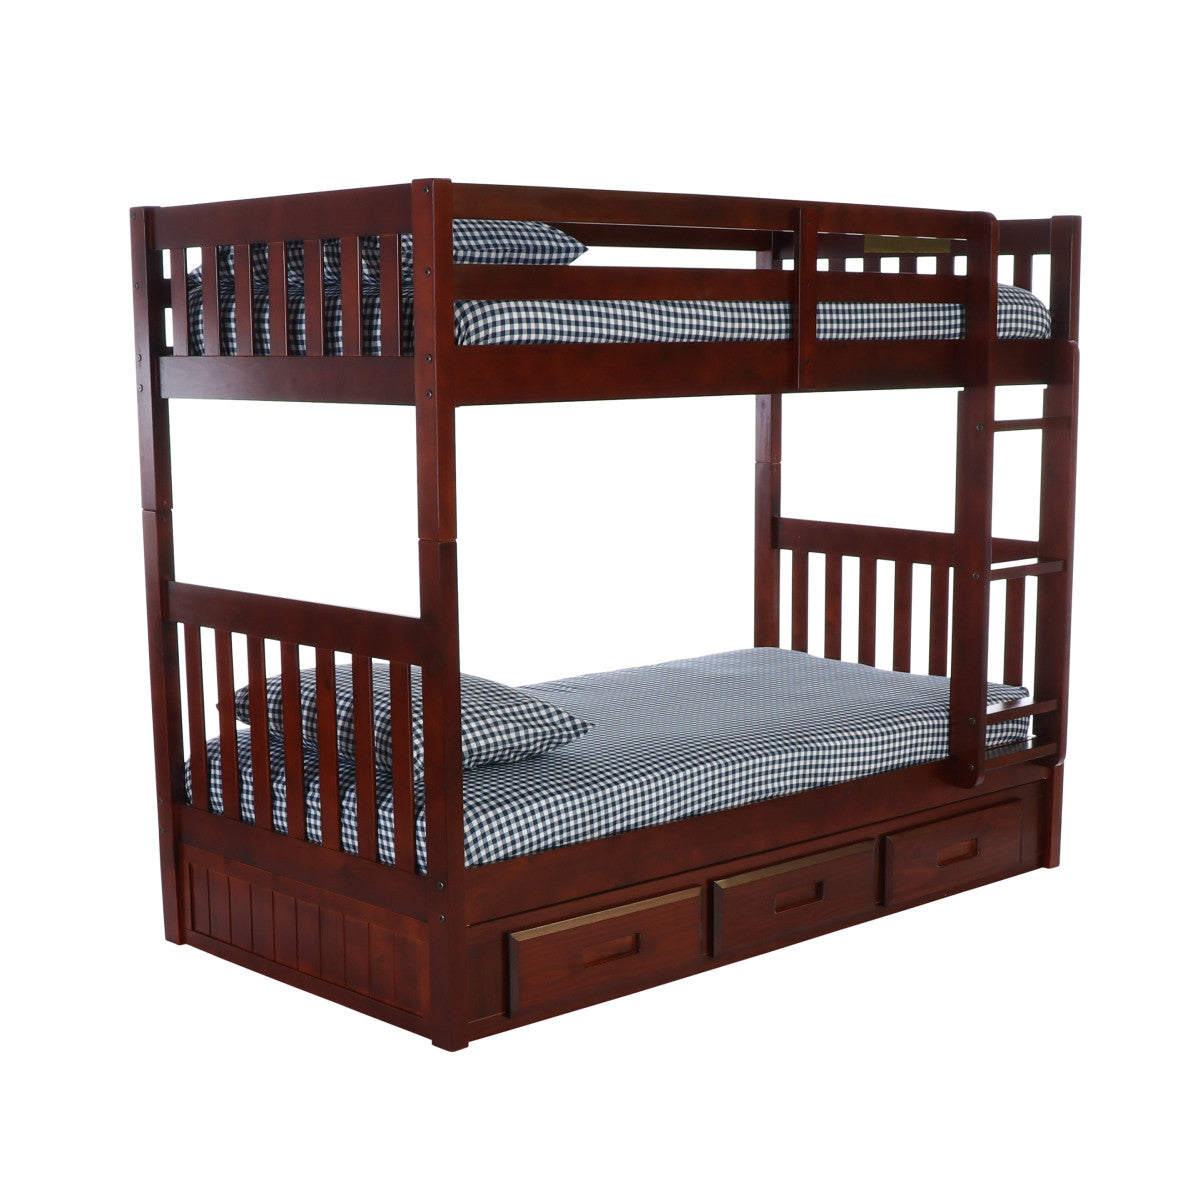 TWIN/TWIN MISSION BUNK BED WITH 3 DRAWER BUNK PEDESTAL IN MERLOT FINISH